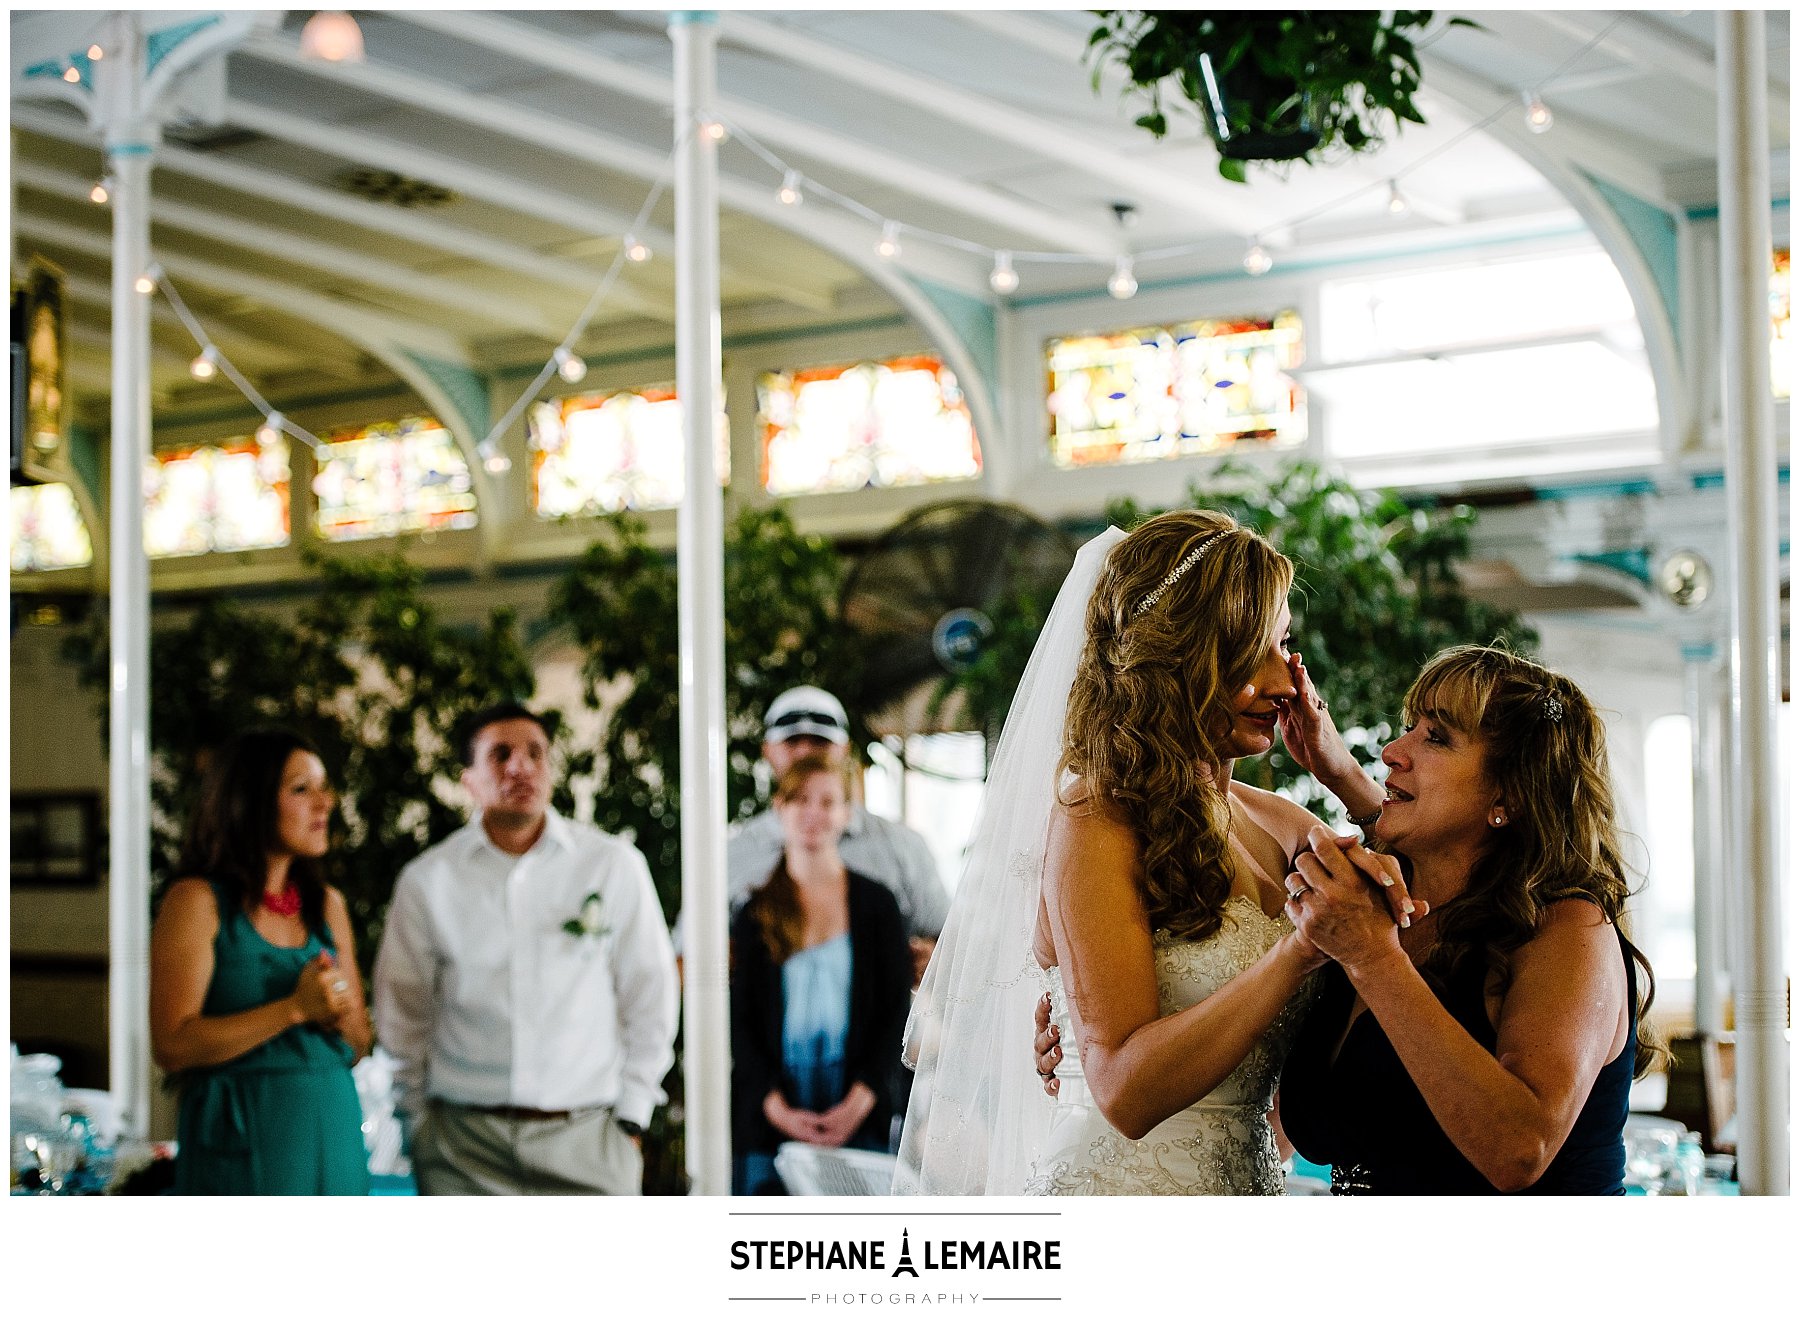 San Diego Wedding Session-Reception at Maritime Museum- Mother and daughter share dance together